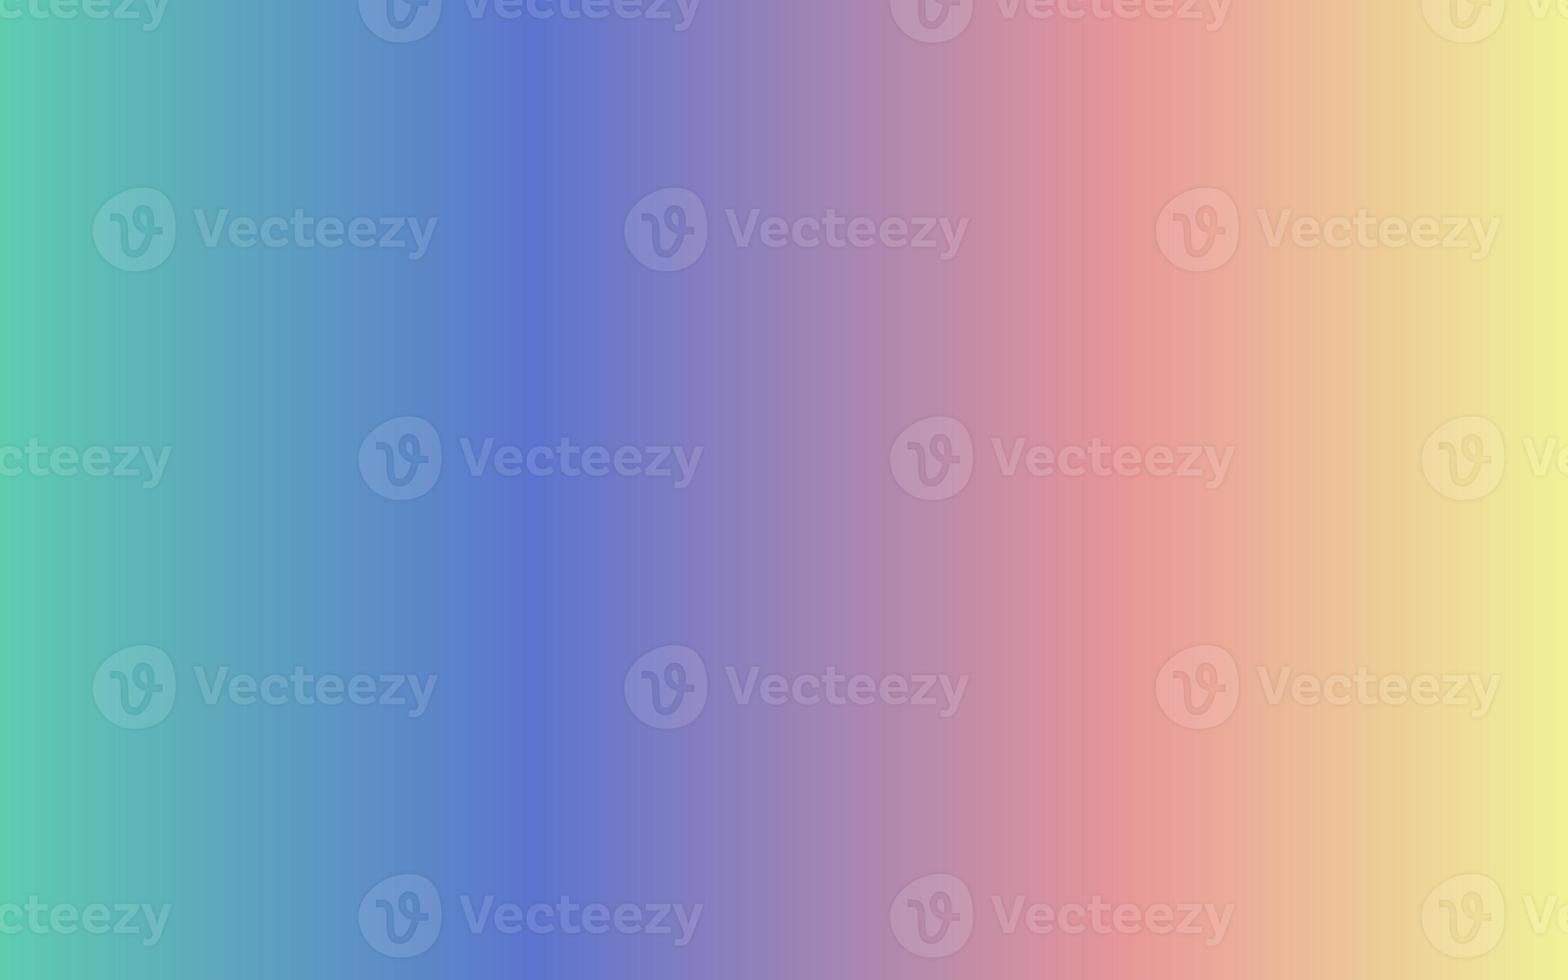 Abstract rainbow color gradient with noise effect photo